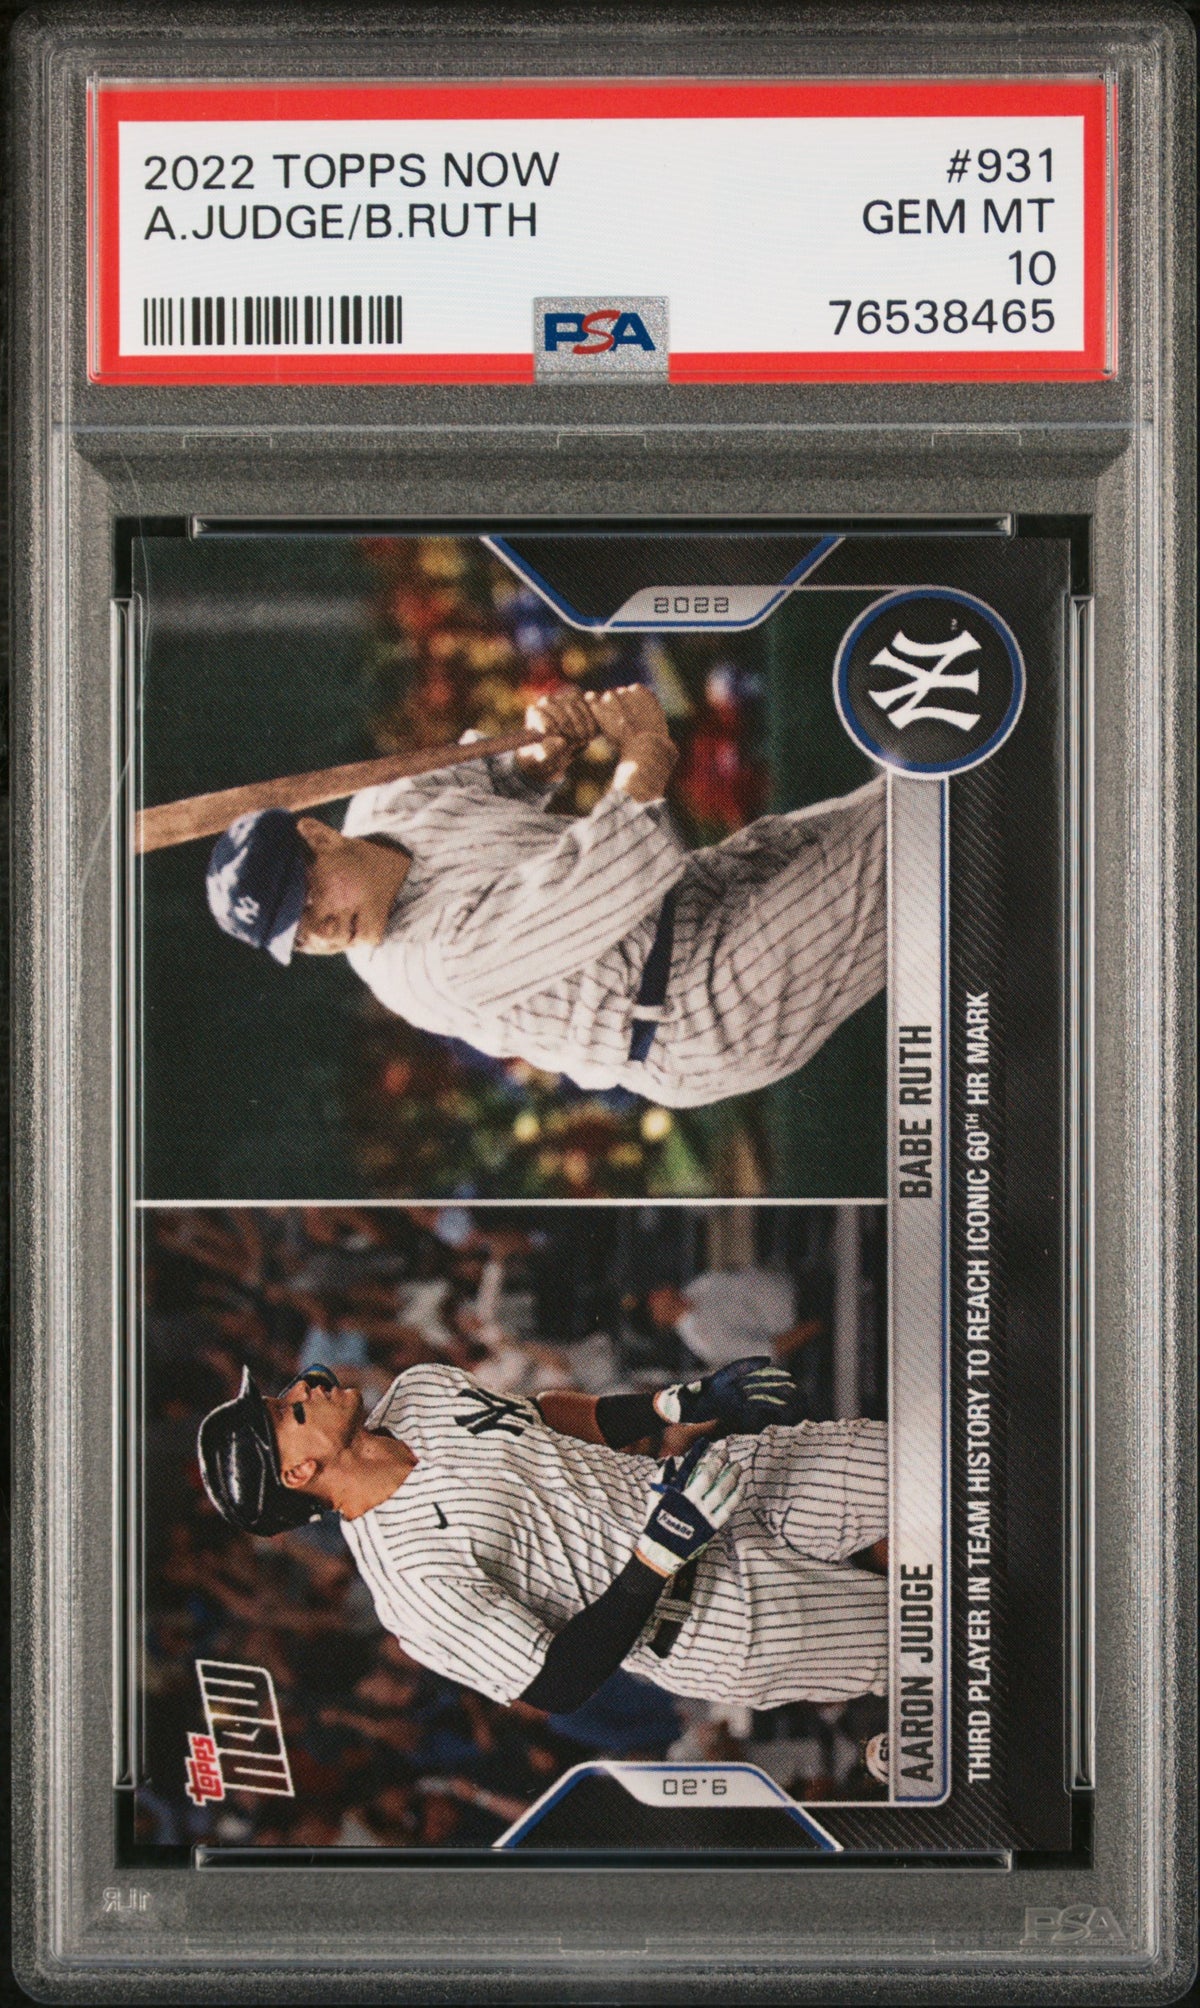 PSA 10 GEM-MT Aaron Judge/ Babe Ruth 2022 Topps Now #931 Rare Trading Card